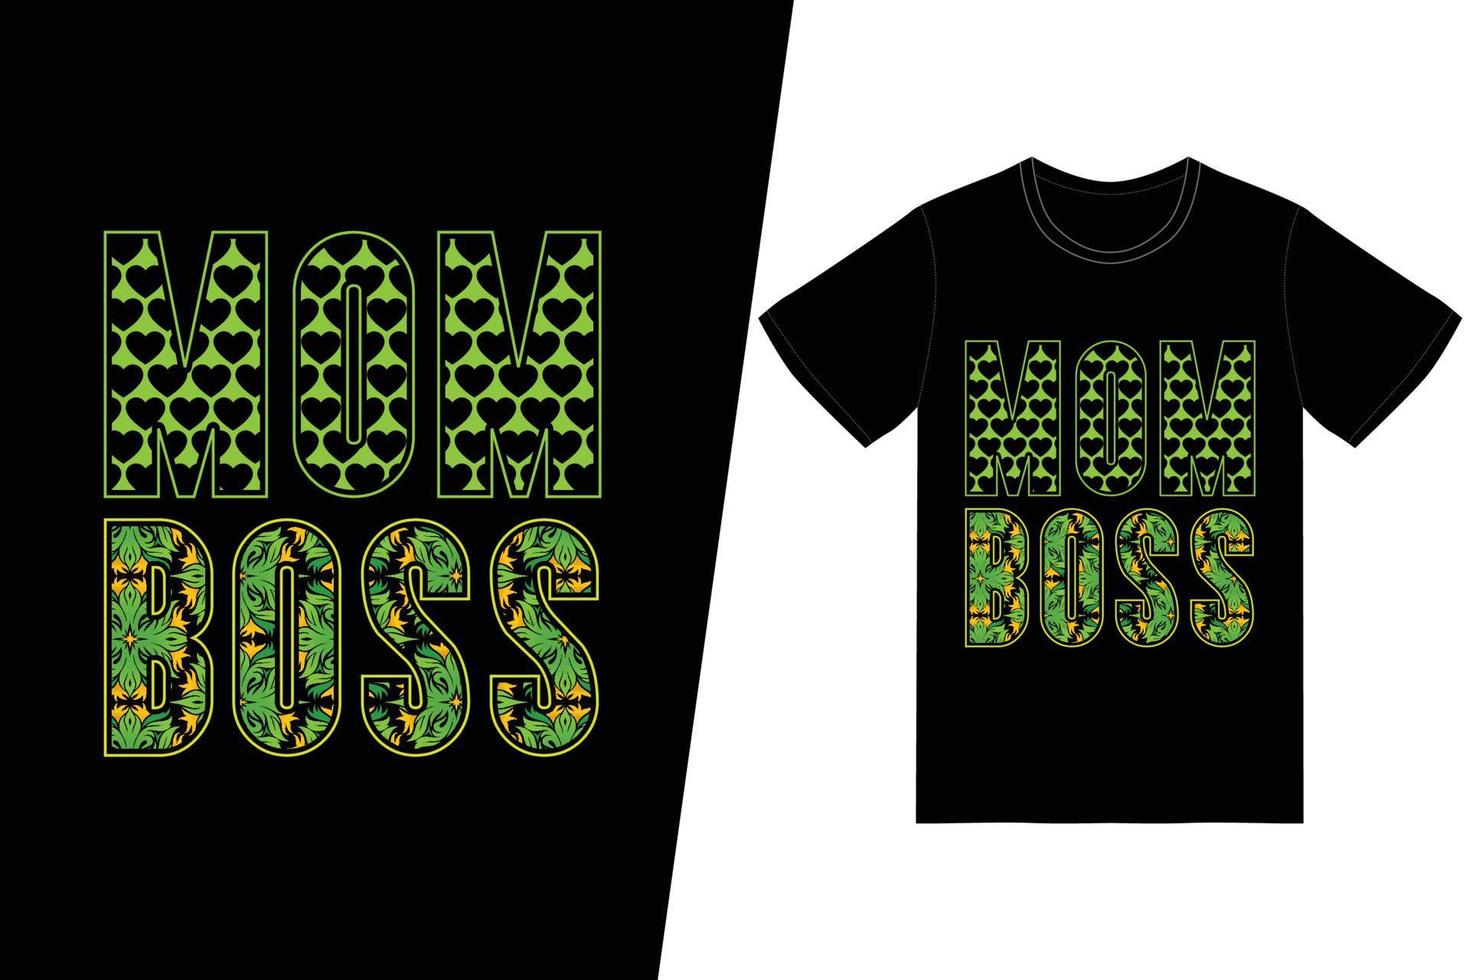 Mom boss t-shirt design. Happy mothers day t-shirt design vector. For t-shirt print and other uses. vector